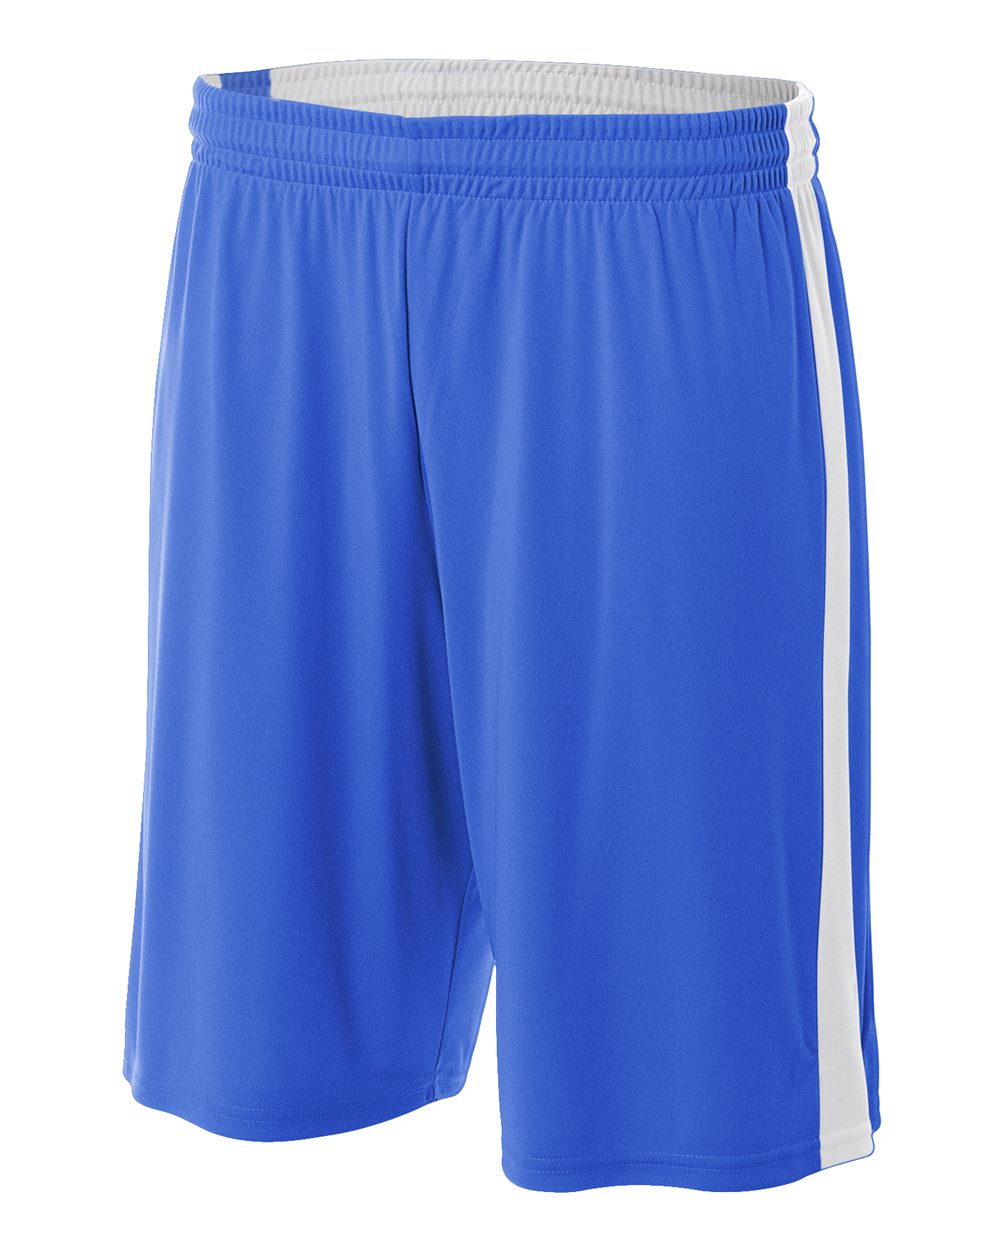 BASKETBALL SHORTS ONLY VERSION #2